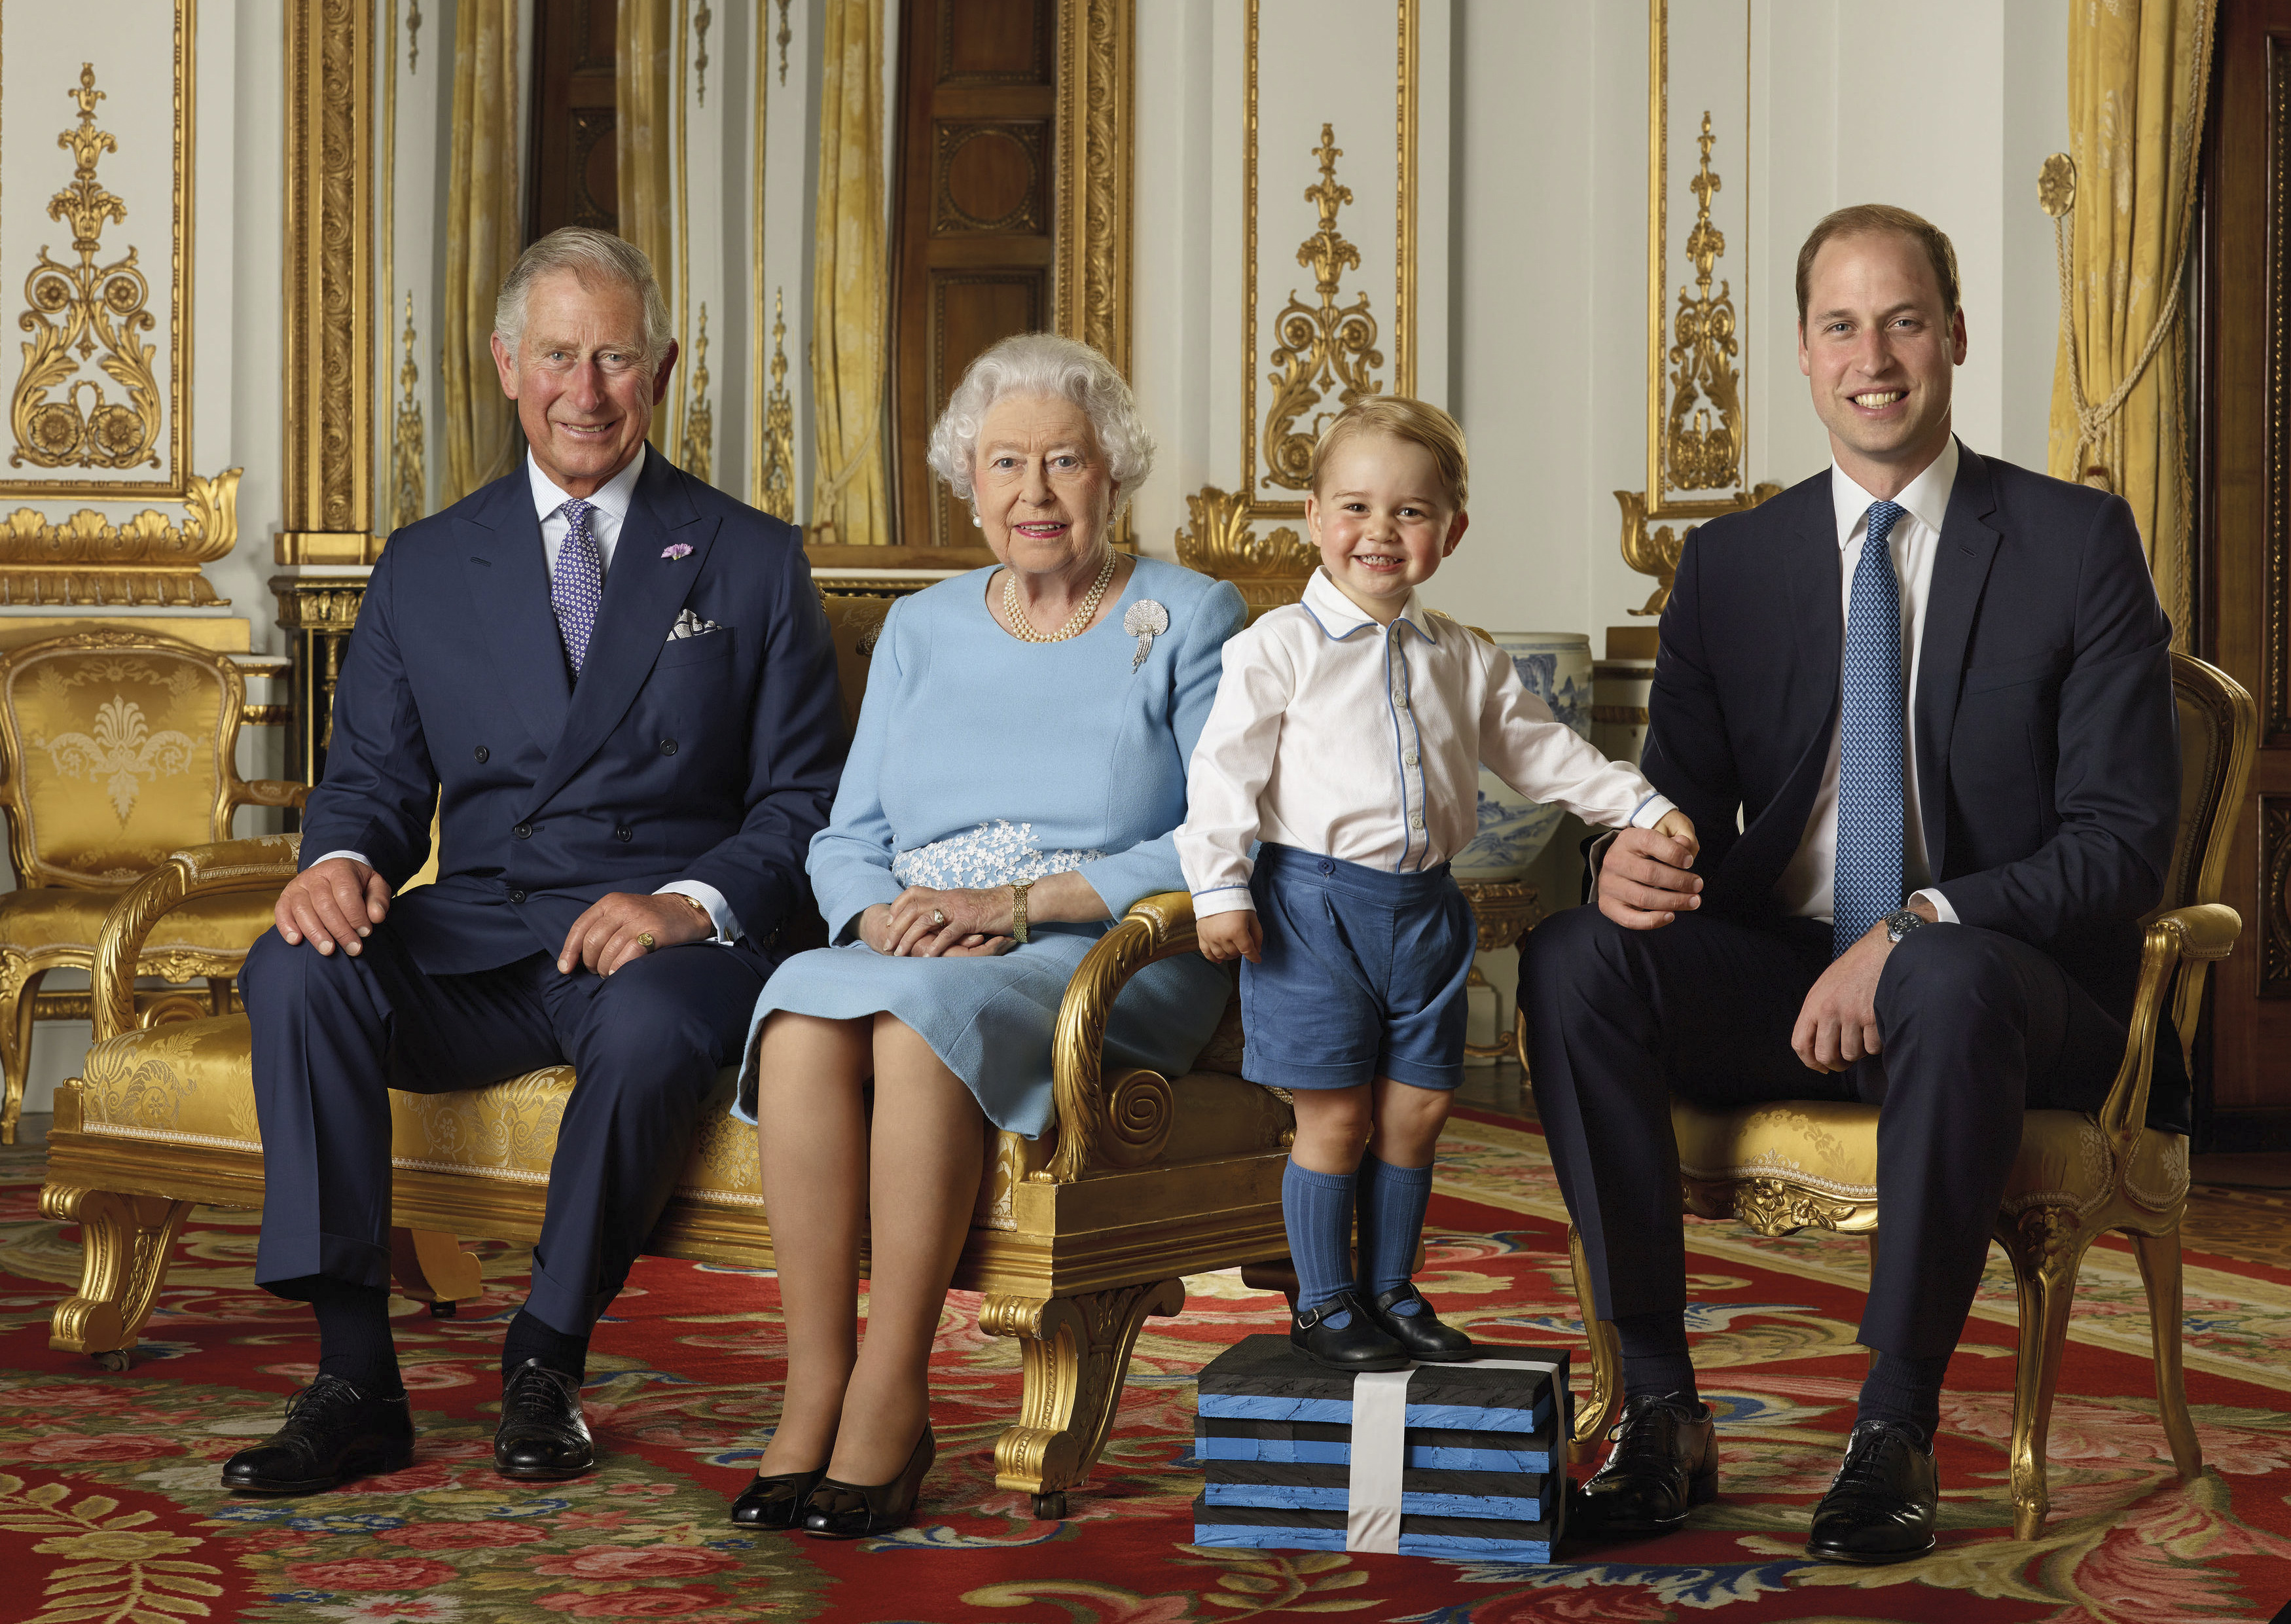 In this image released by the Royal Mail on April 20, 2016, Britain's Prince George stands on foam blocks during a photo shoot in mid-2015 in the White Drawing Room at Buckingham Palace in London, for a stamp sheet to mark the 90th birthday of Britain's Queen Elizabeth II. He is photographed with Prince Charles, Queen Elizabeth II and his father, Prince William, Duke of Cambridge.